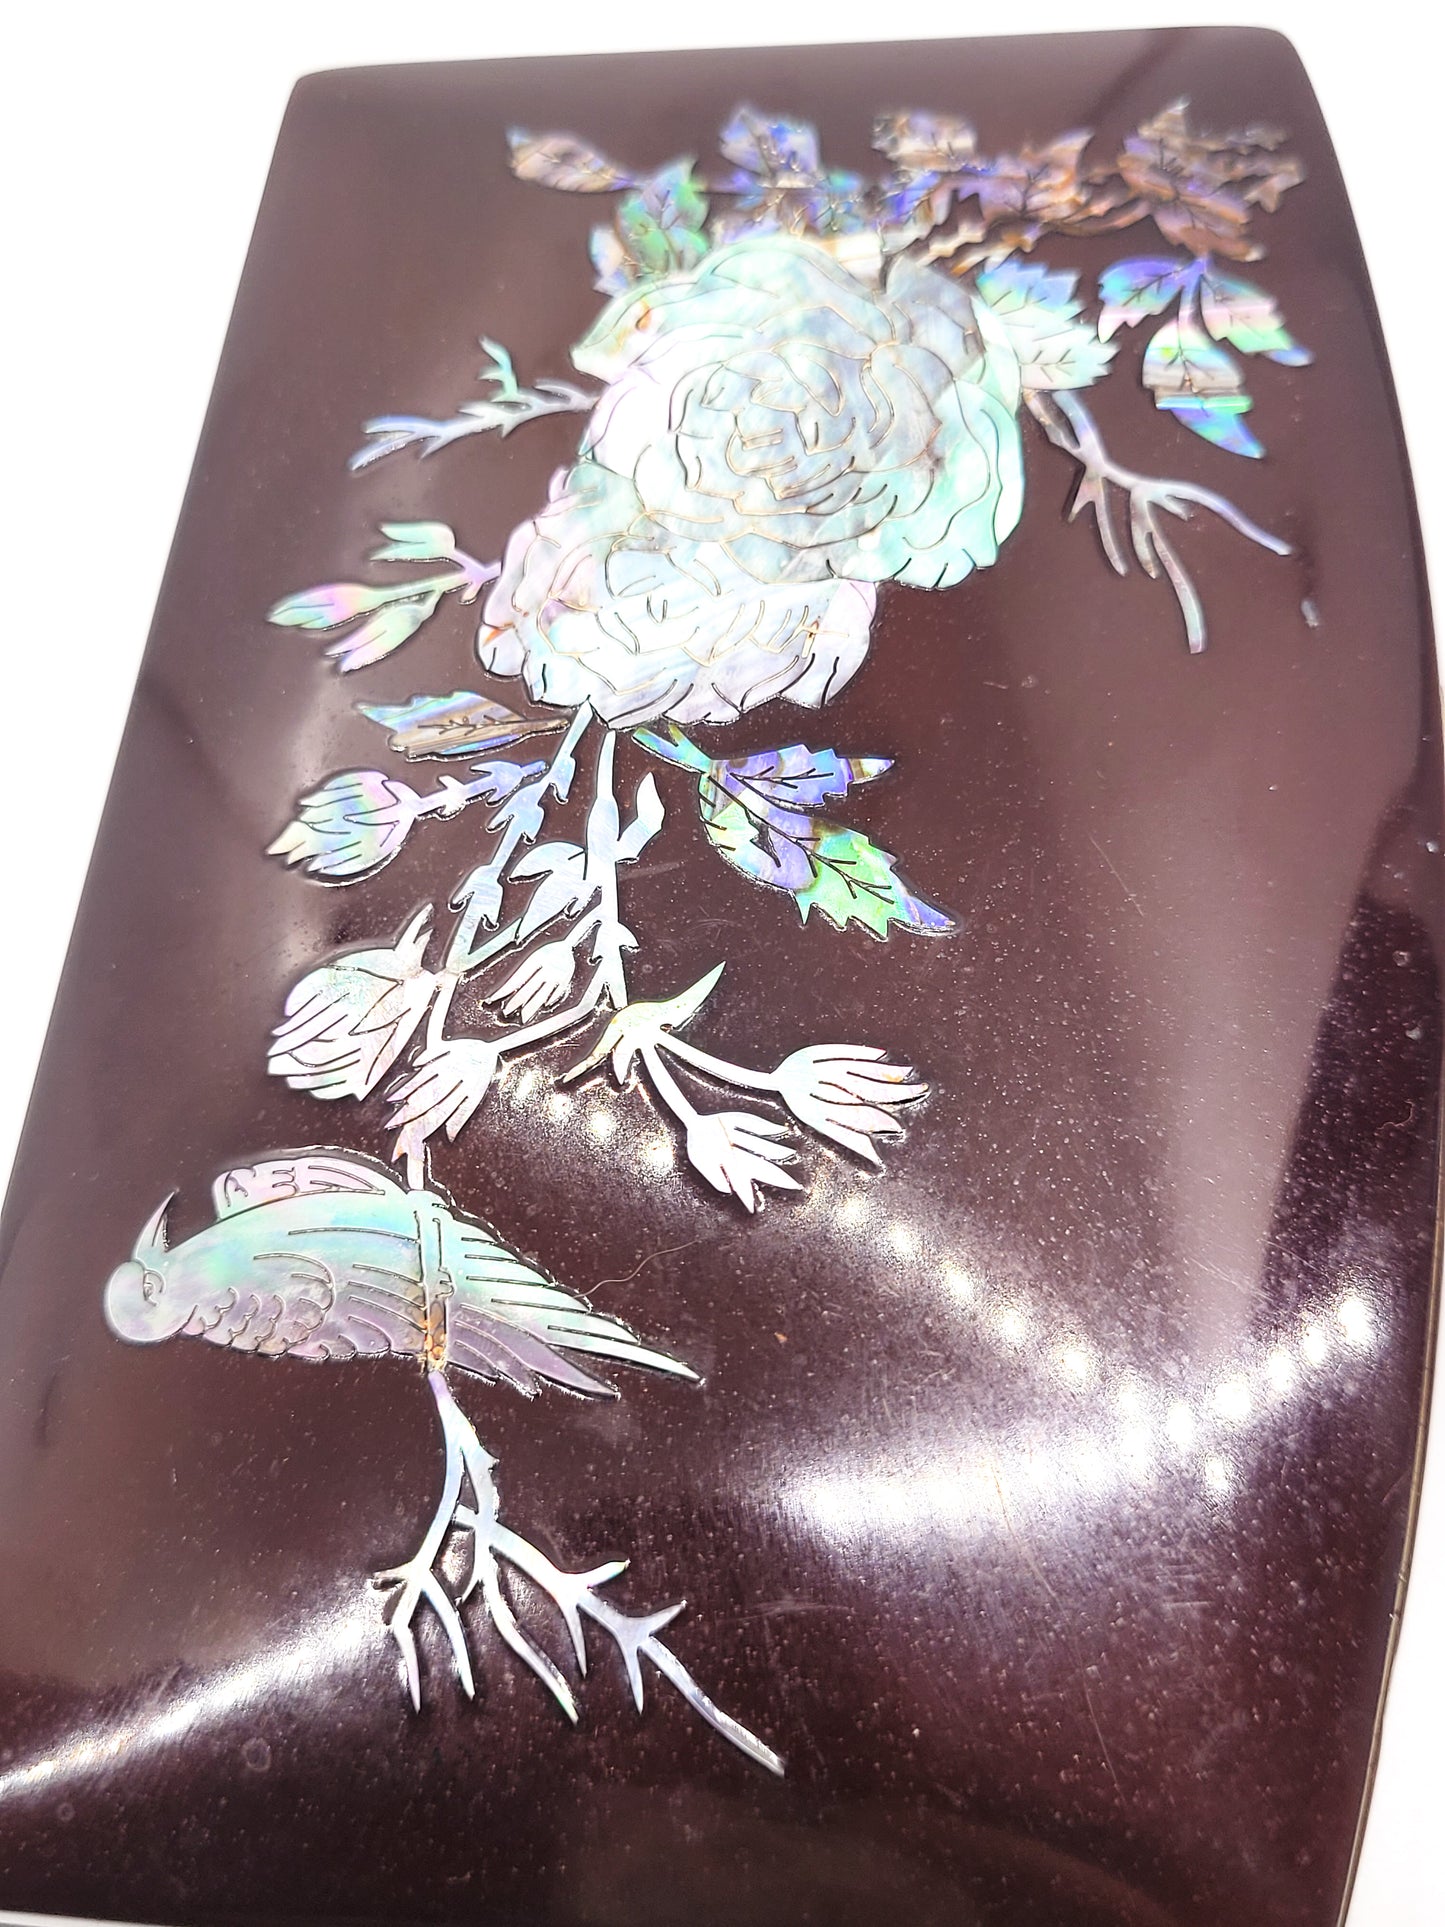 Abalone shell inlay bird and roses vintage flower red wood lacquer jewelry box